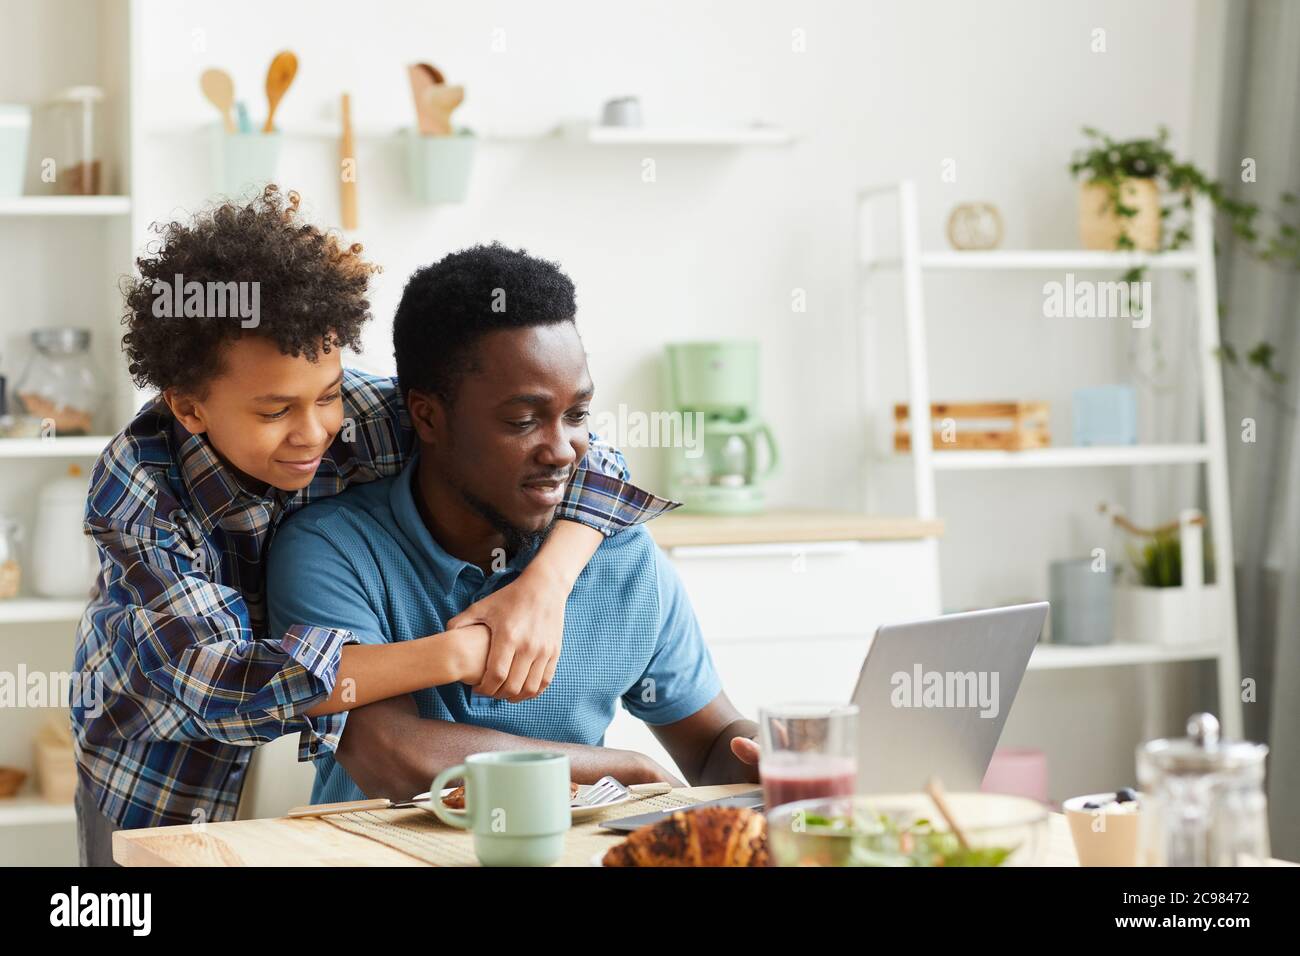 African man sitting at the table and working on laptop with his son embracing him they are in the kitchen Stock Photo